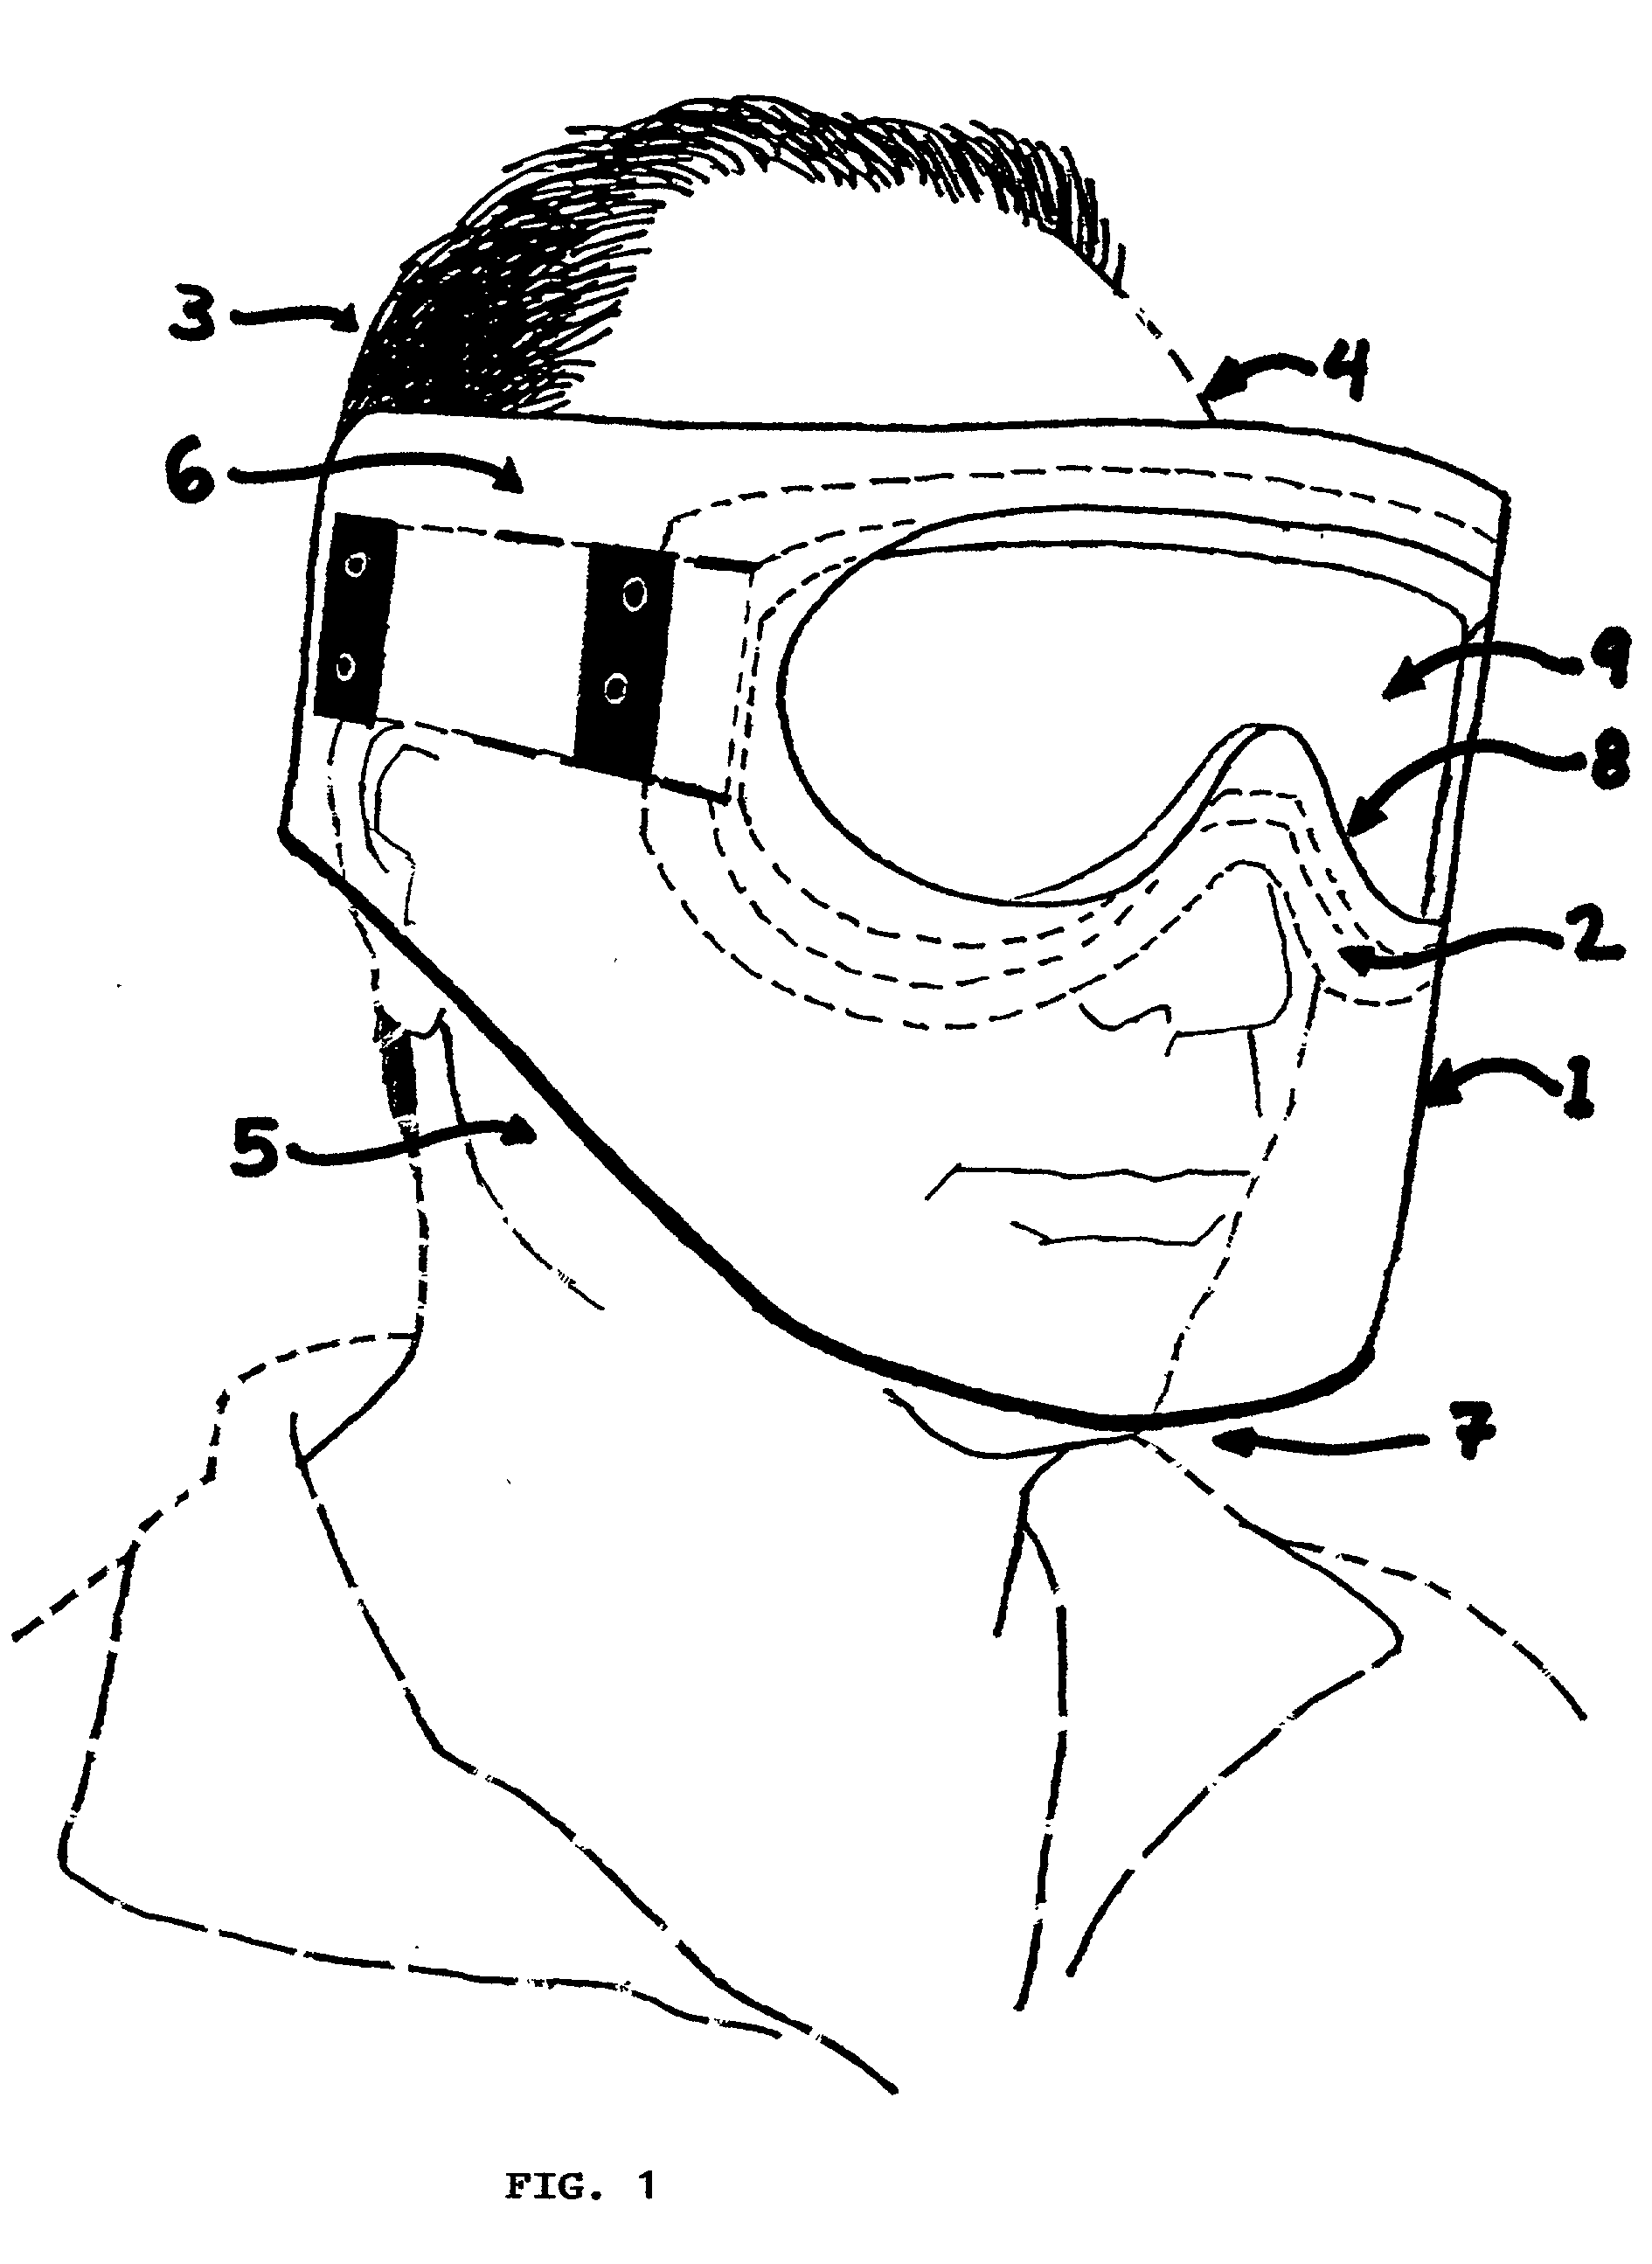 Face shield that attaches to existing eye goggle